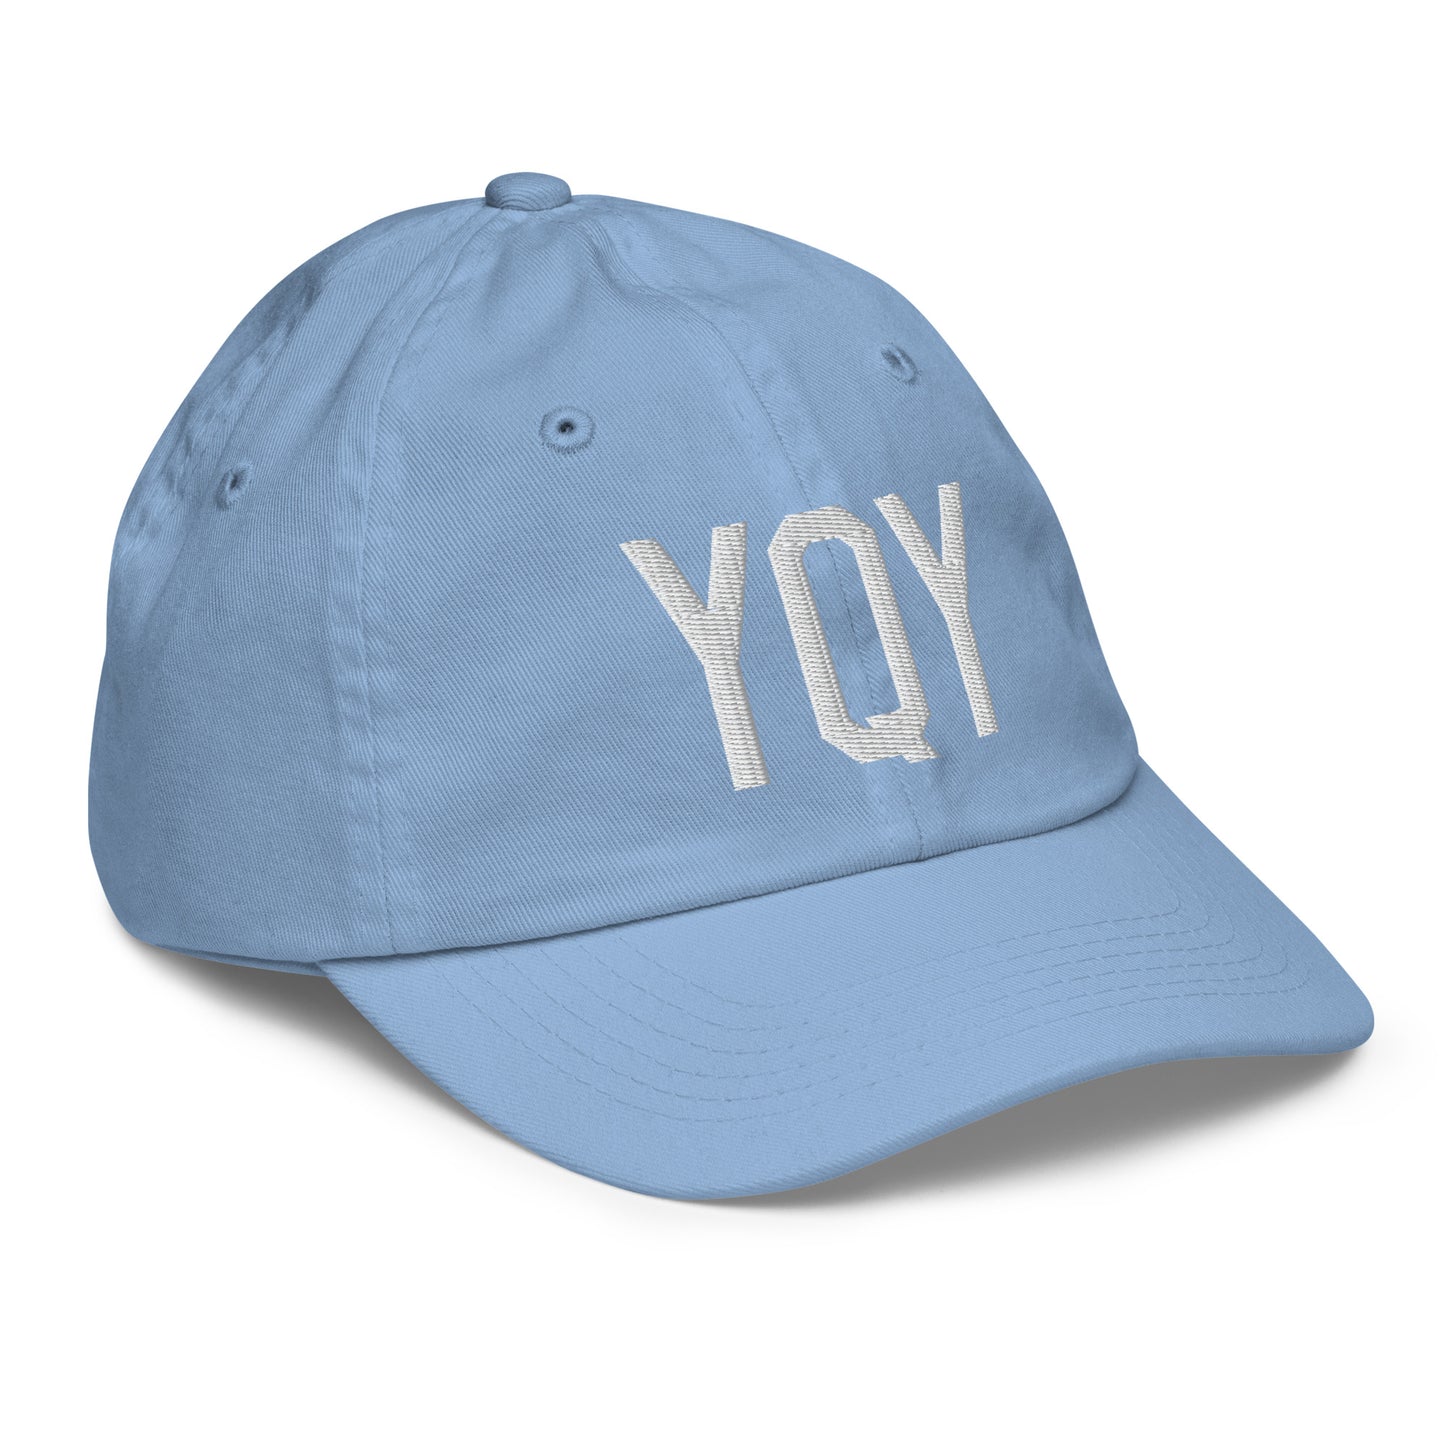 Airport Code Kid's Baseball Cap - White • YQY Sydney • YHM Designs - Image 23